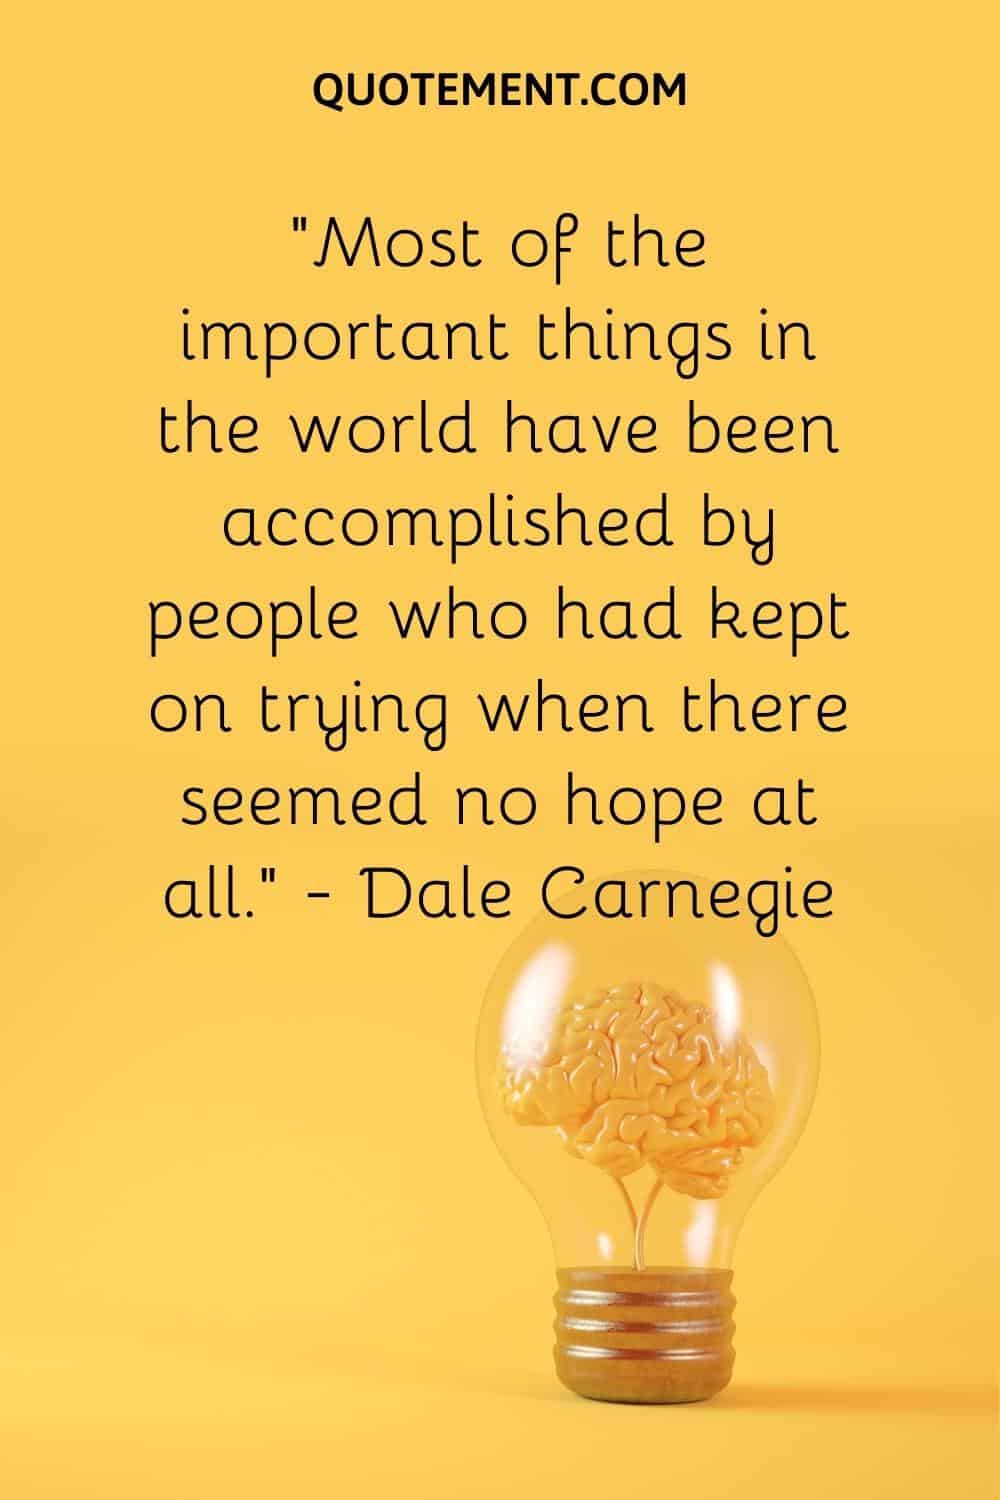 “Most of the important things in the world have been accomplished by people who had kept on trying when there seemed no hope at all.” — Dale Carnegie